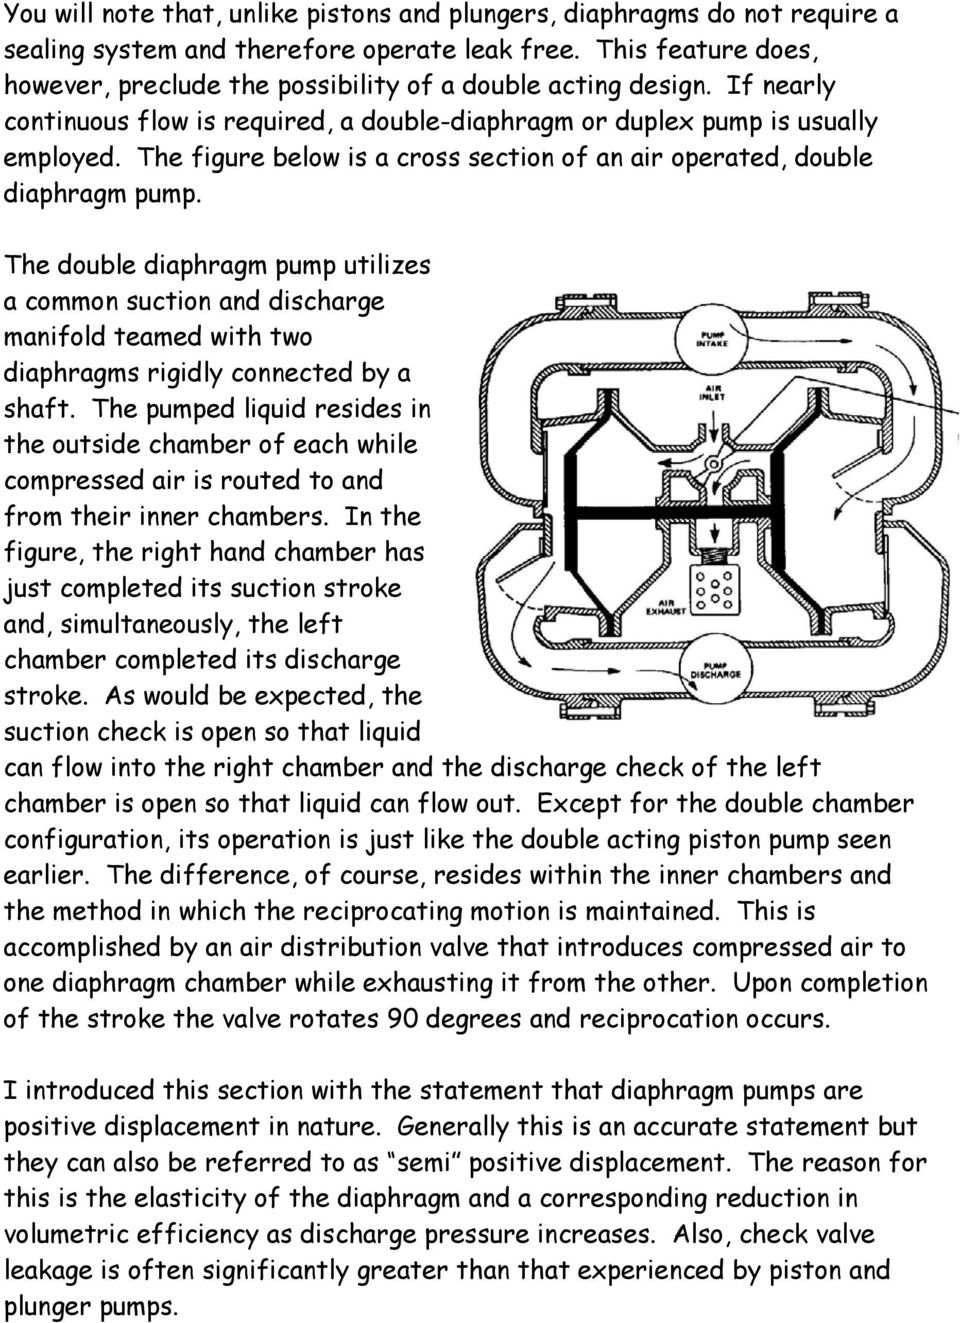 The figure below is a cross section of an air operated, double diaphragm pump.